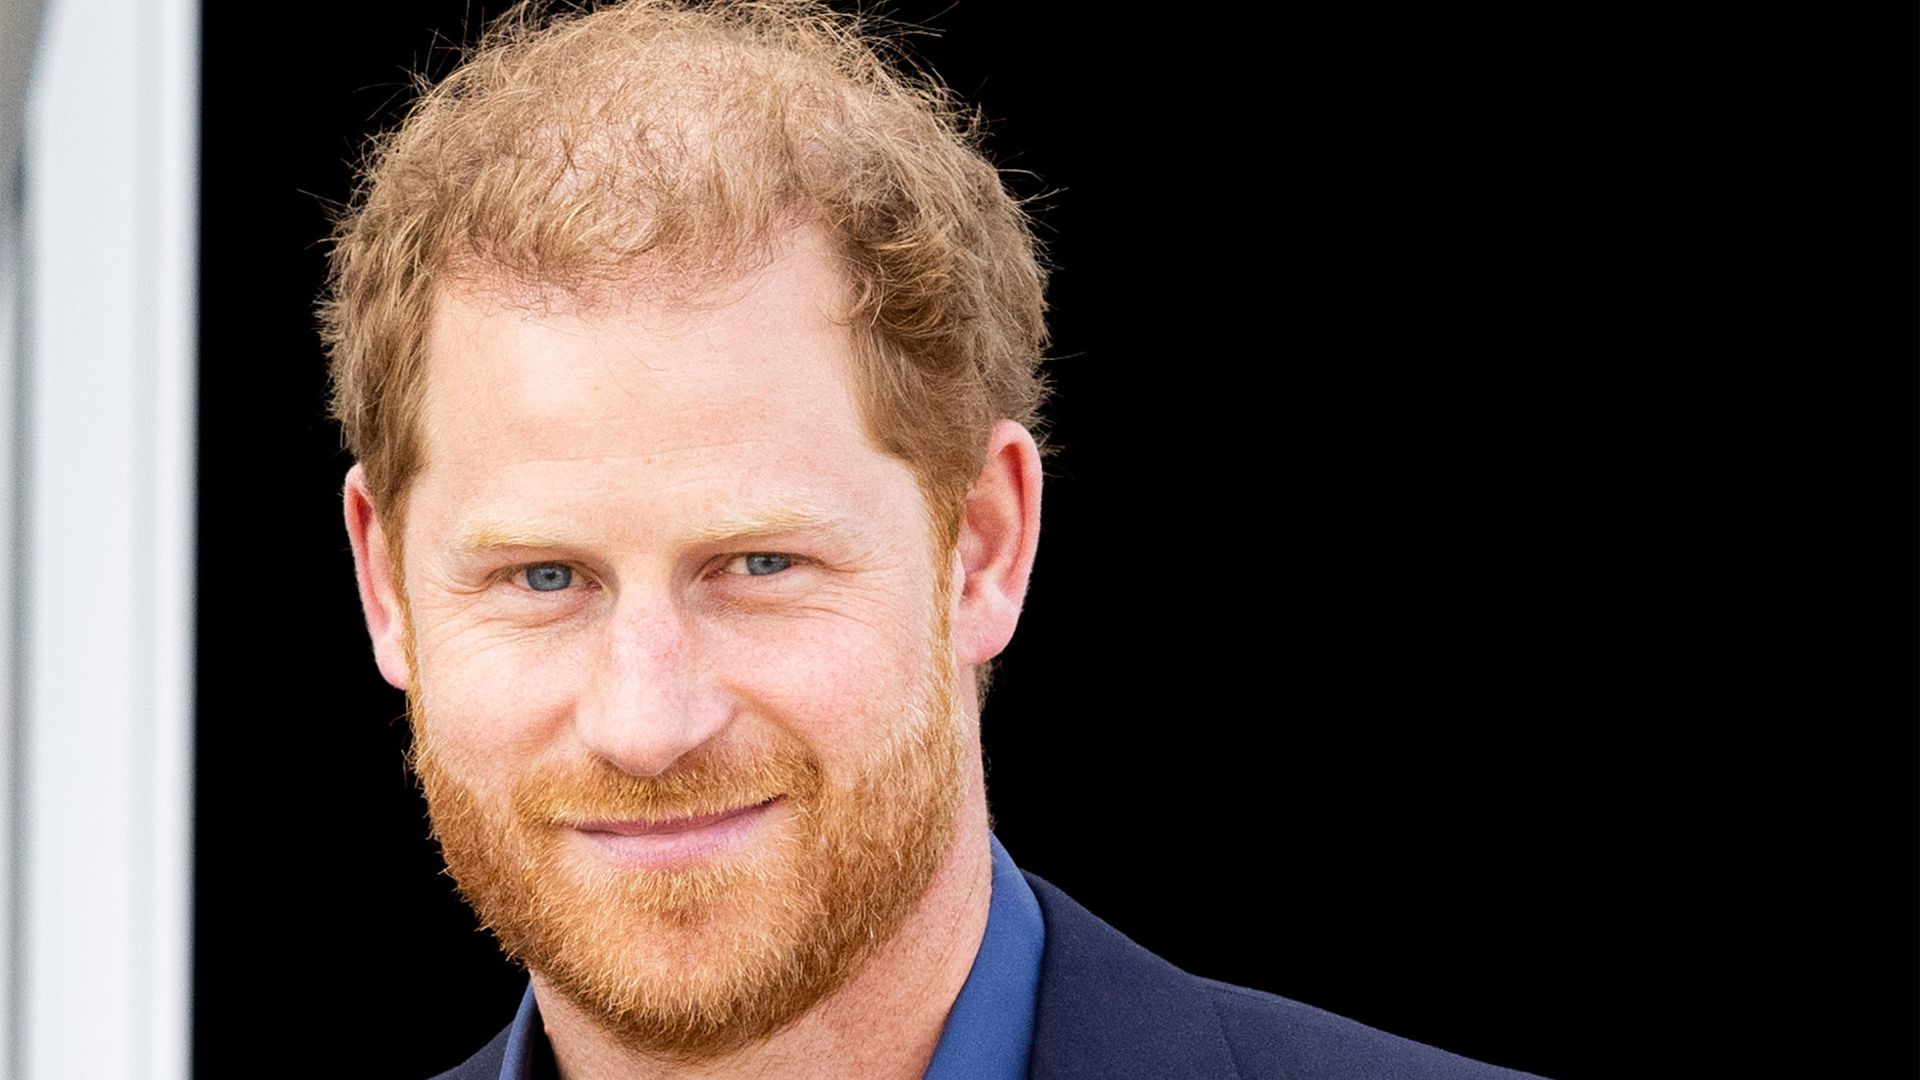 Prince Harry in blue suit